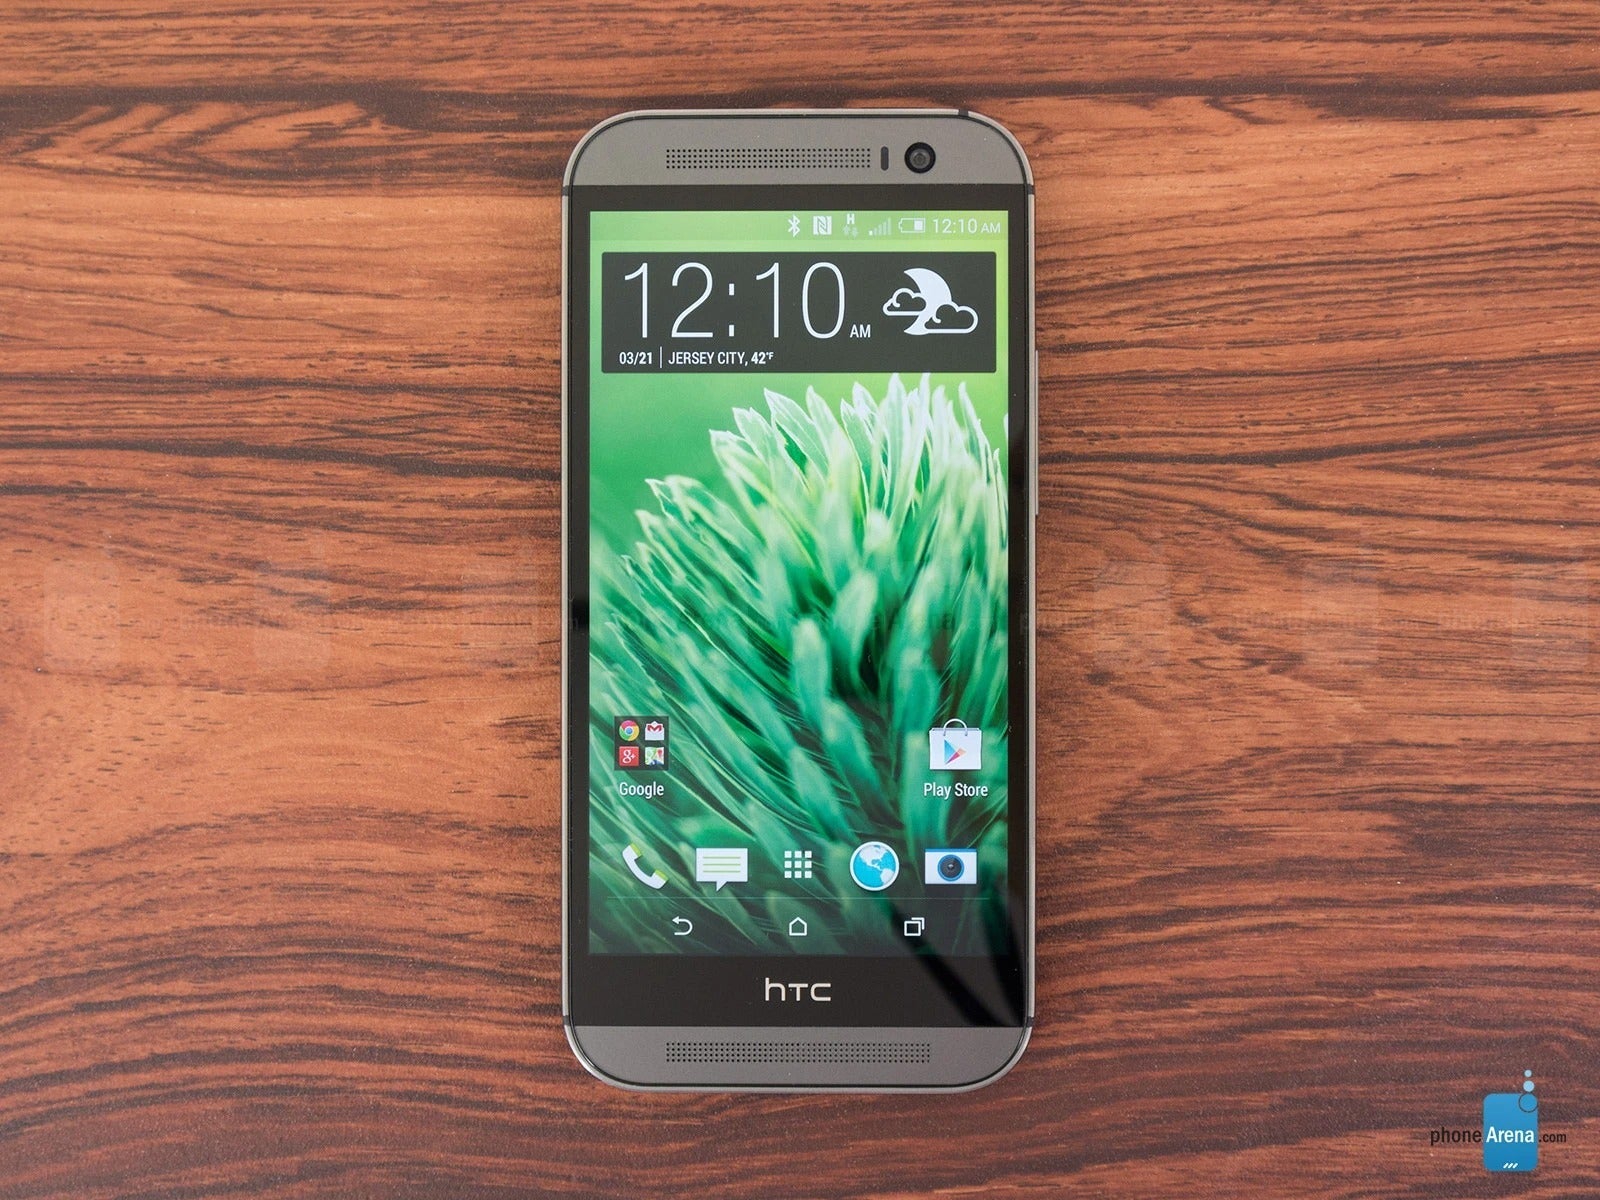 HTC One M8 - Legendary HTC prepping to launch a new premium phone?